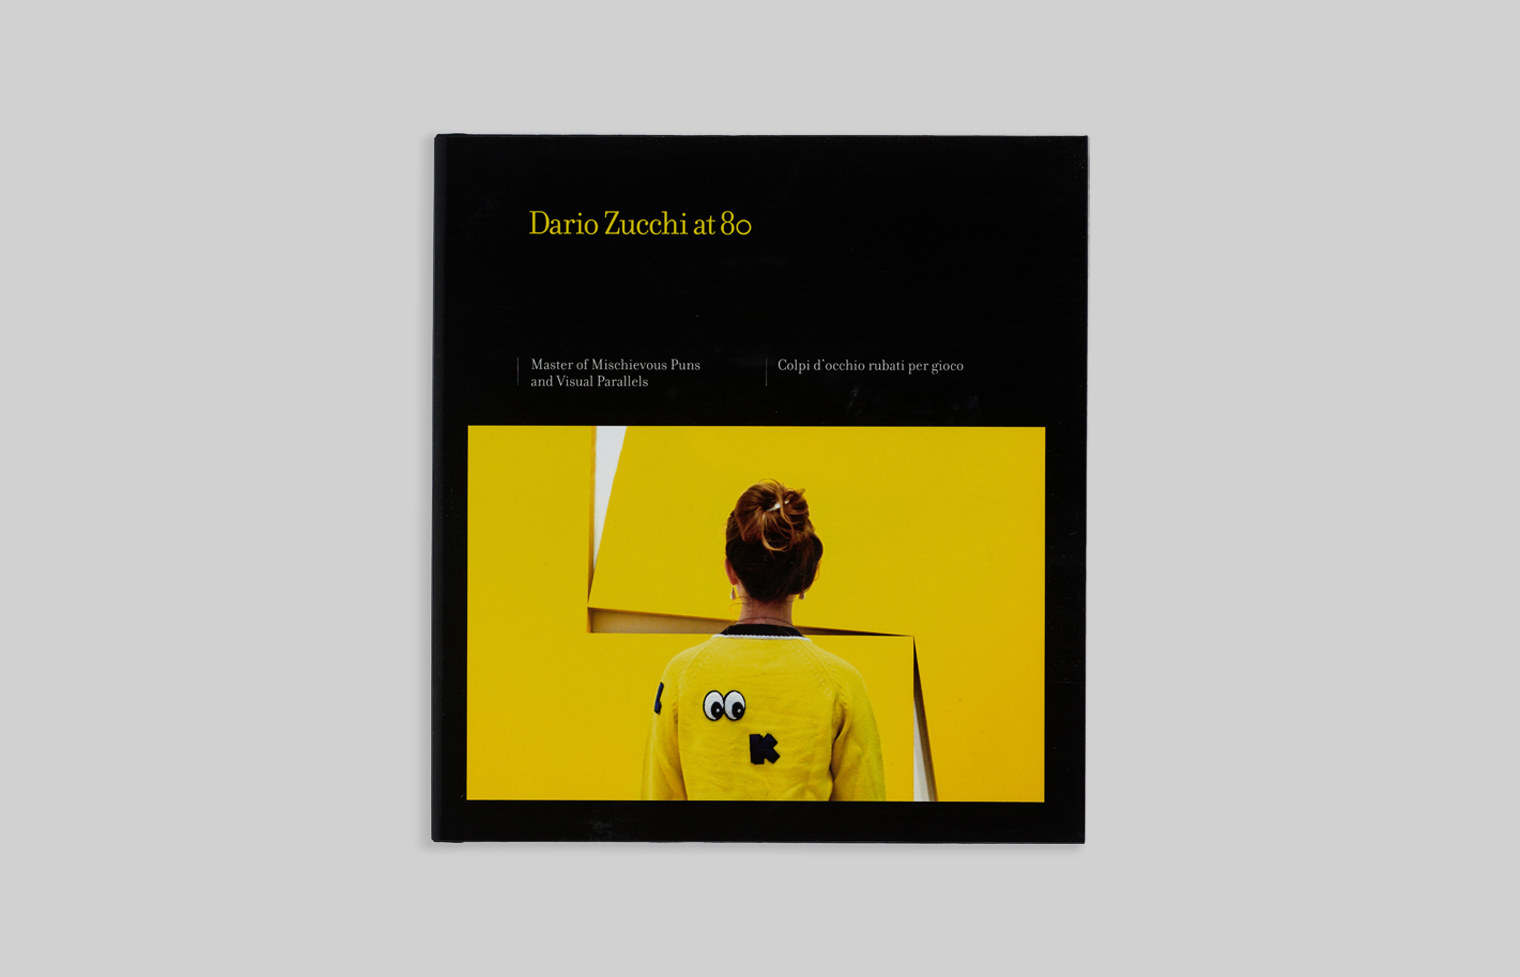 Zucchi photo on the cover has a figure wearing a yellow sweater standing in front of a yellow artwork with offset pieces.